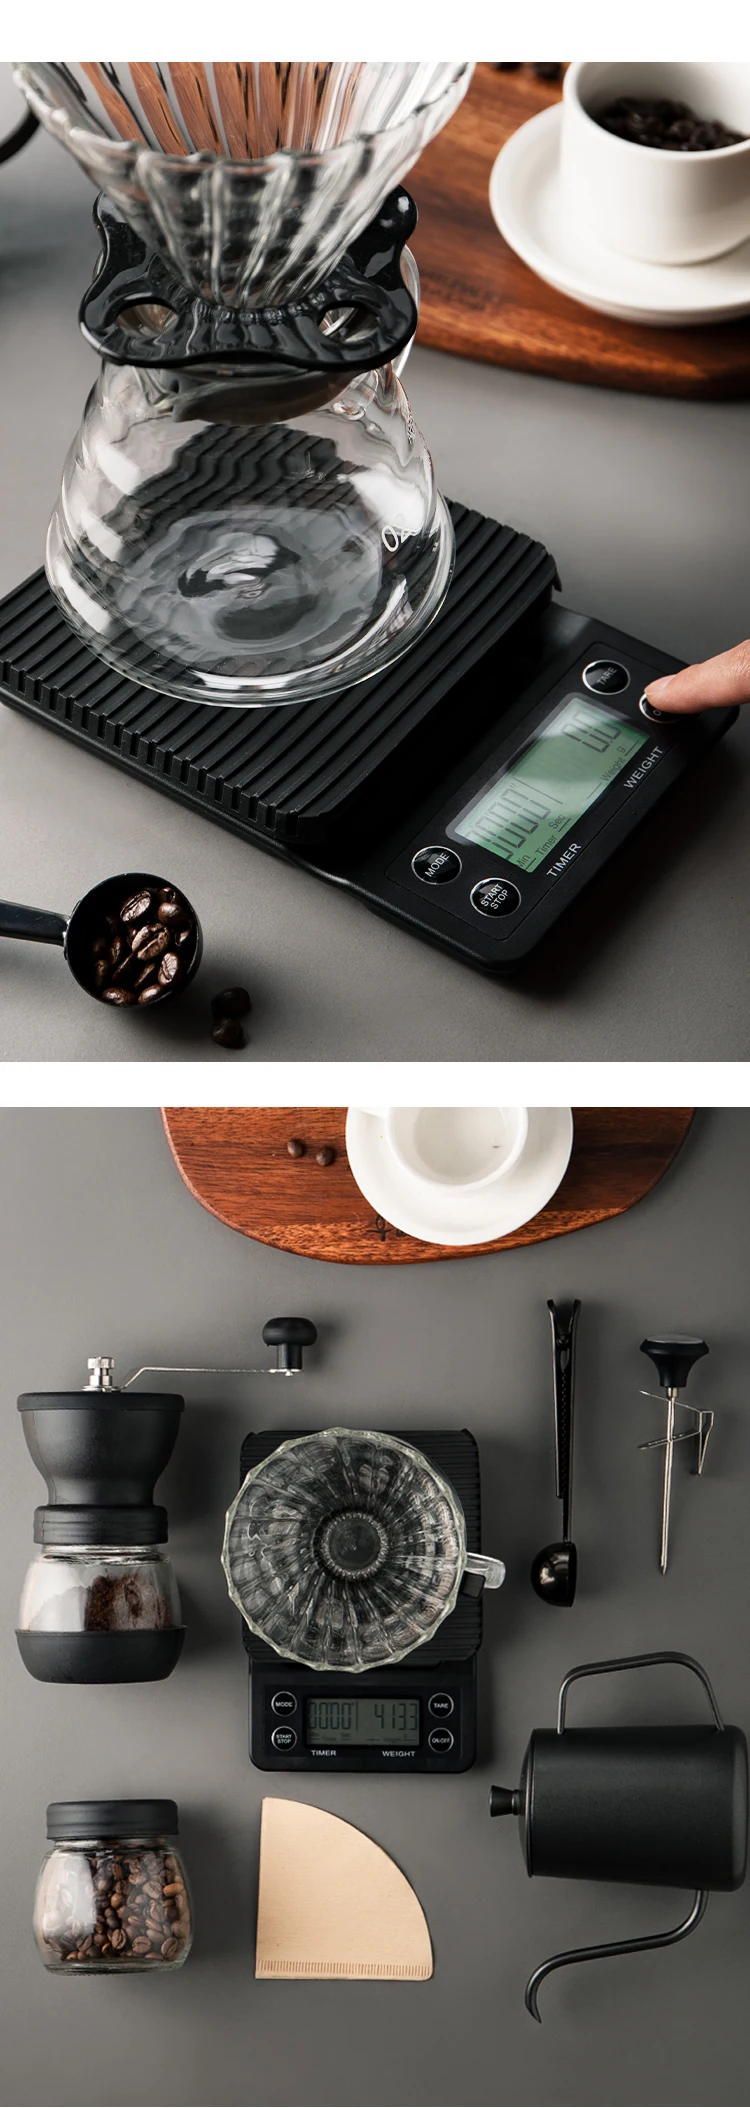 https://ae01.alicdn.com/kf/Sb2e5e80f8b884f5fa505d7e539aecccar/Pour-over-Coffee-Electronic-Scale-Special-Coffee-Bean-Weighing-Timing-Weighing-Kitchen-Electronic-Scale-Baking-Scale.jpg